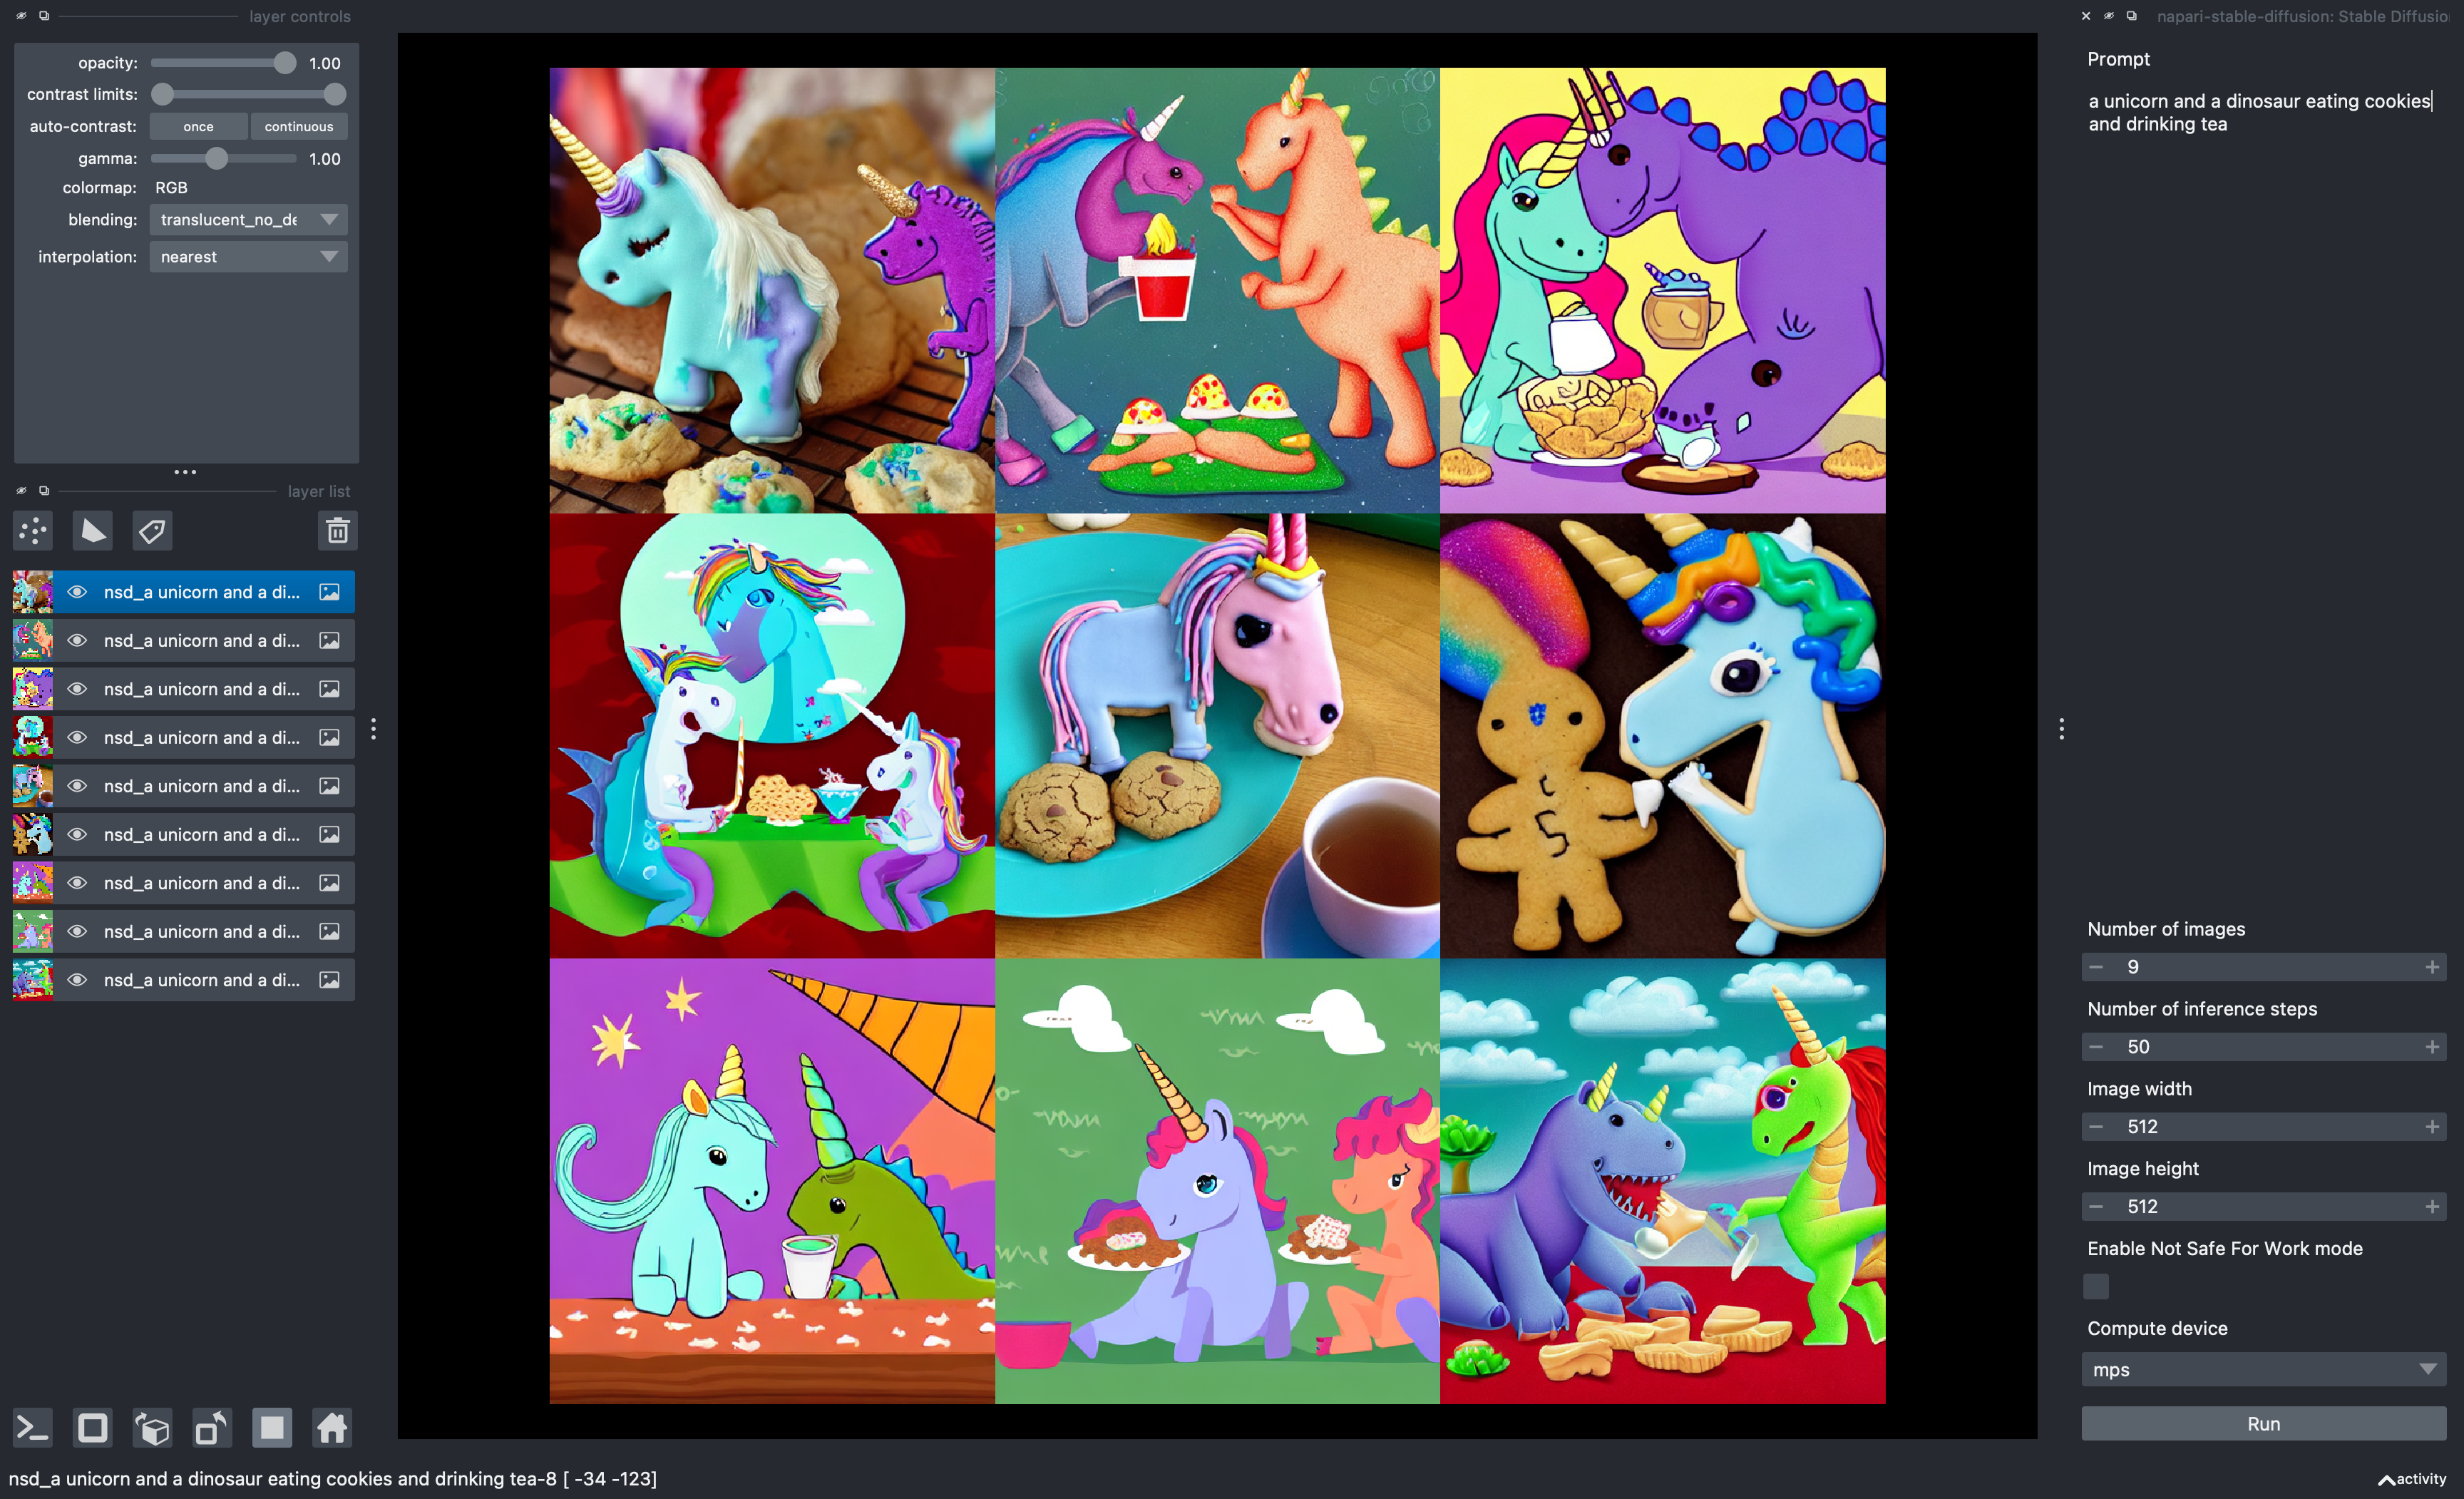 demo image of napari-stable-diffusion of the prompt "a unicorn and a dinosaur eating cookies and drinking tea"